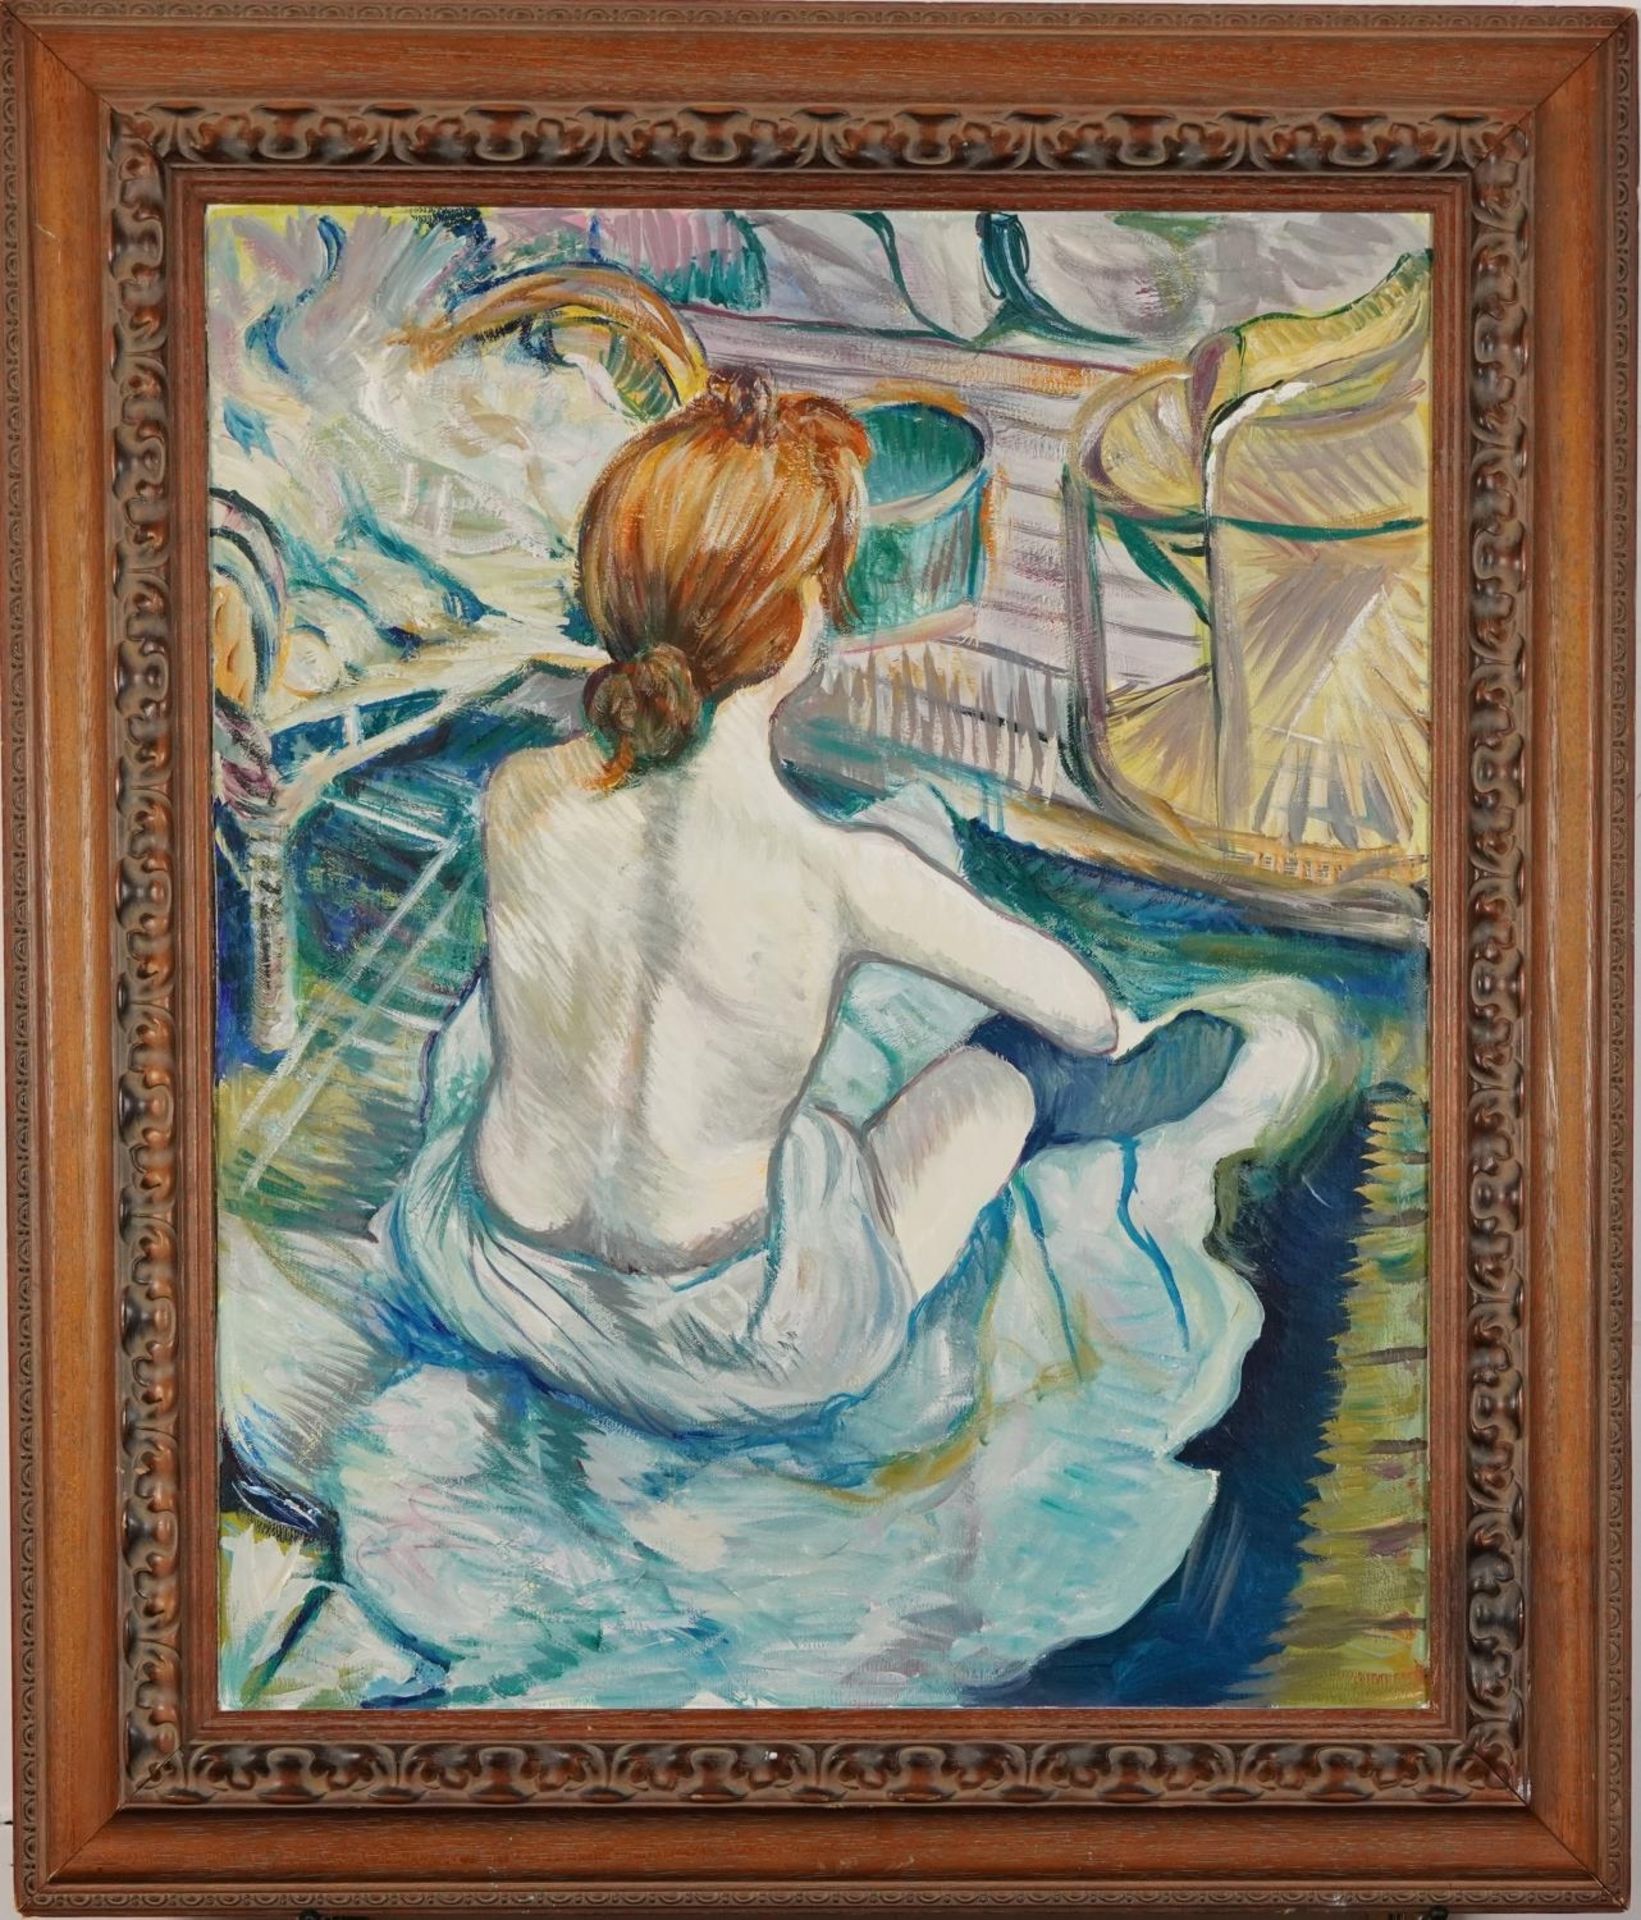 Clive Fredriksson - After Henri de Toulouse Lautrec - Seated female in an interior, oil on canvas, - Image 2 of 4